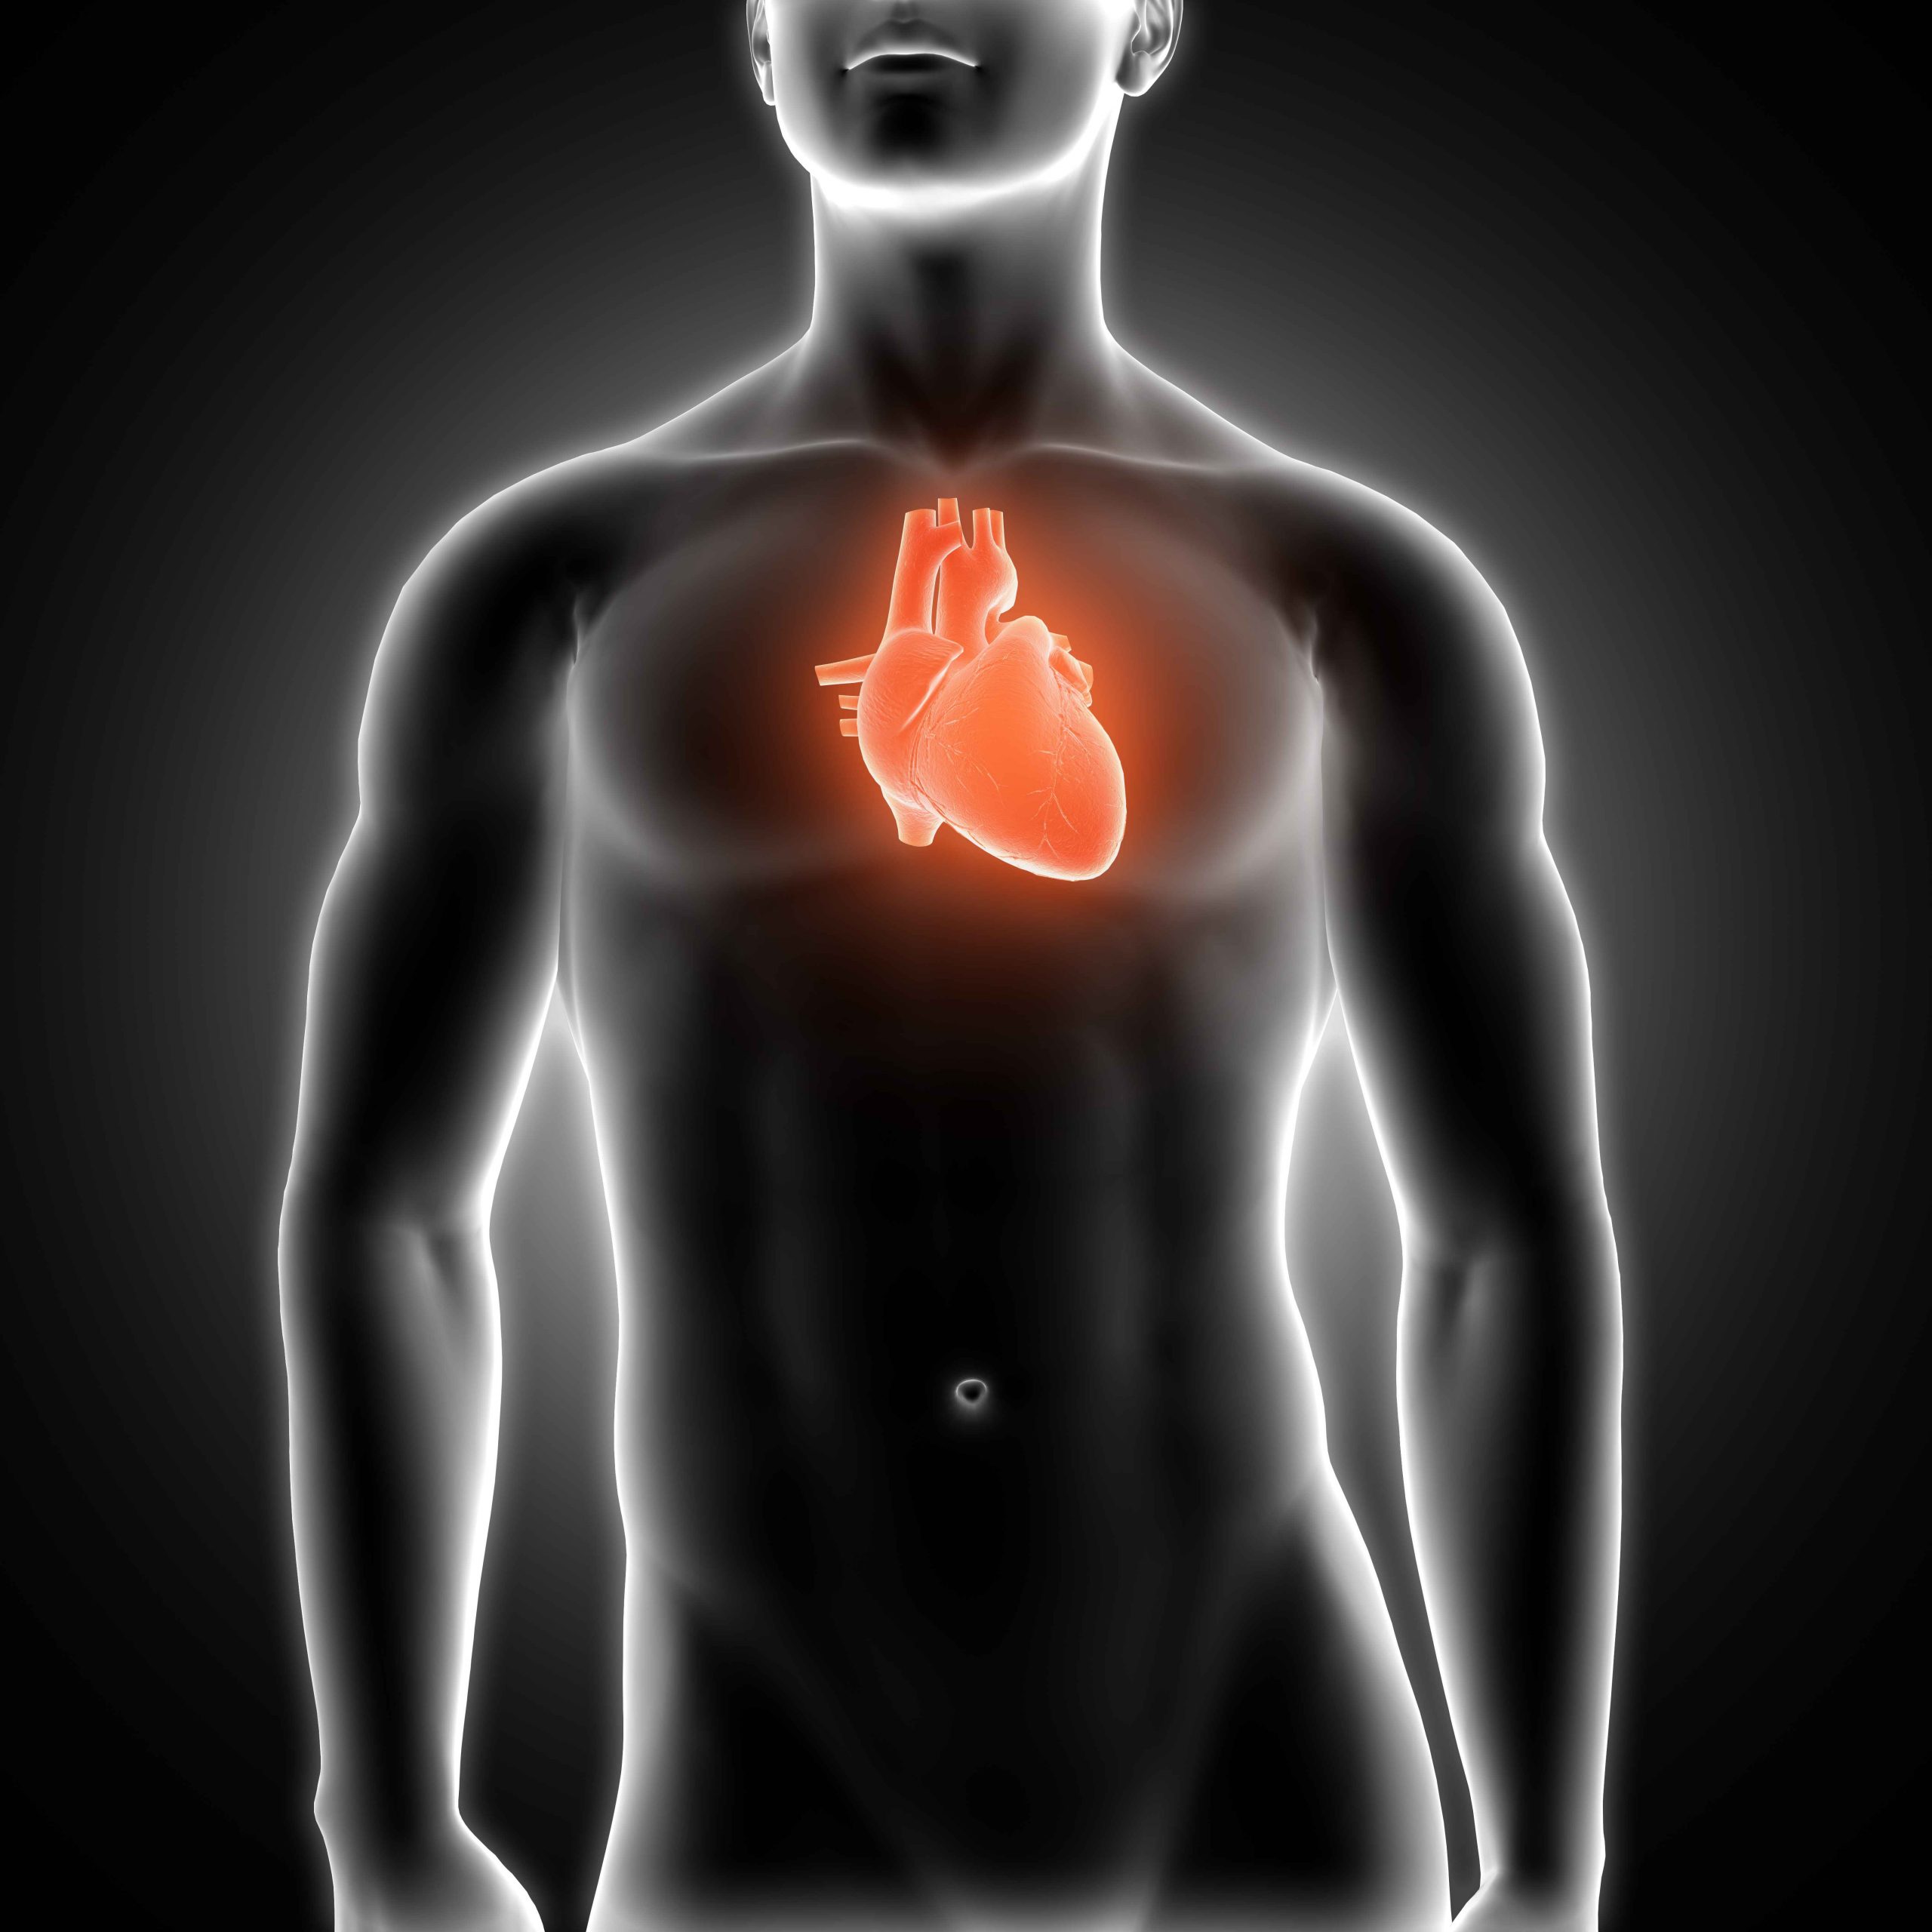 Myocarditis: Inflammation of the heart muscle that can be serious but treatable.